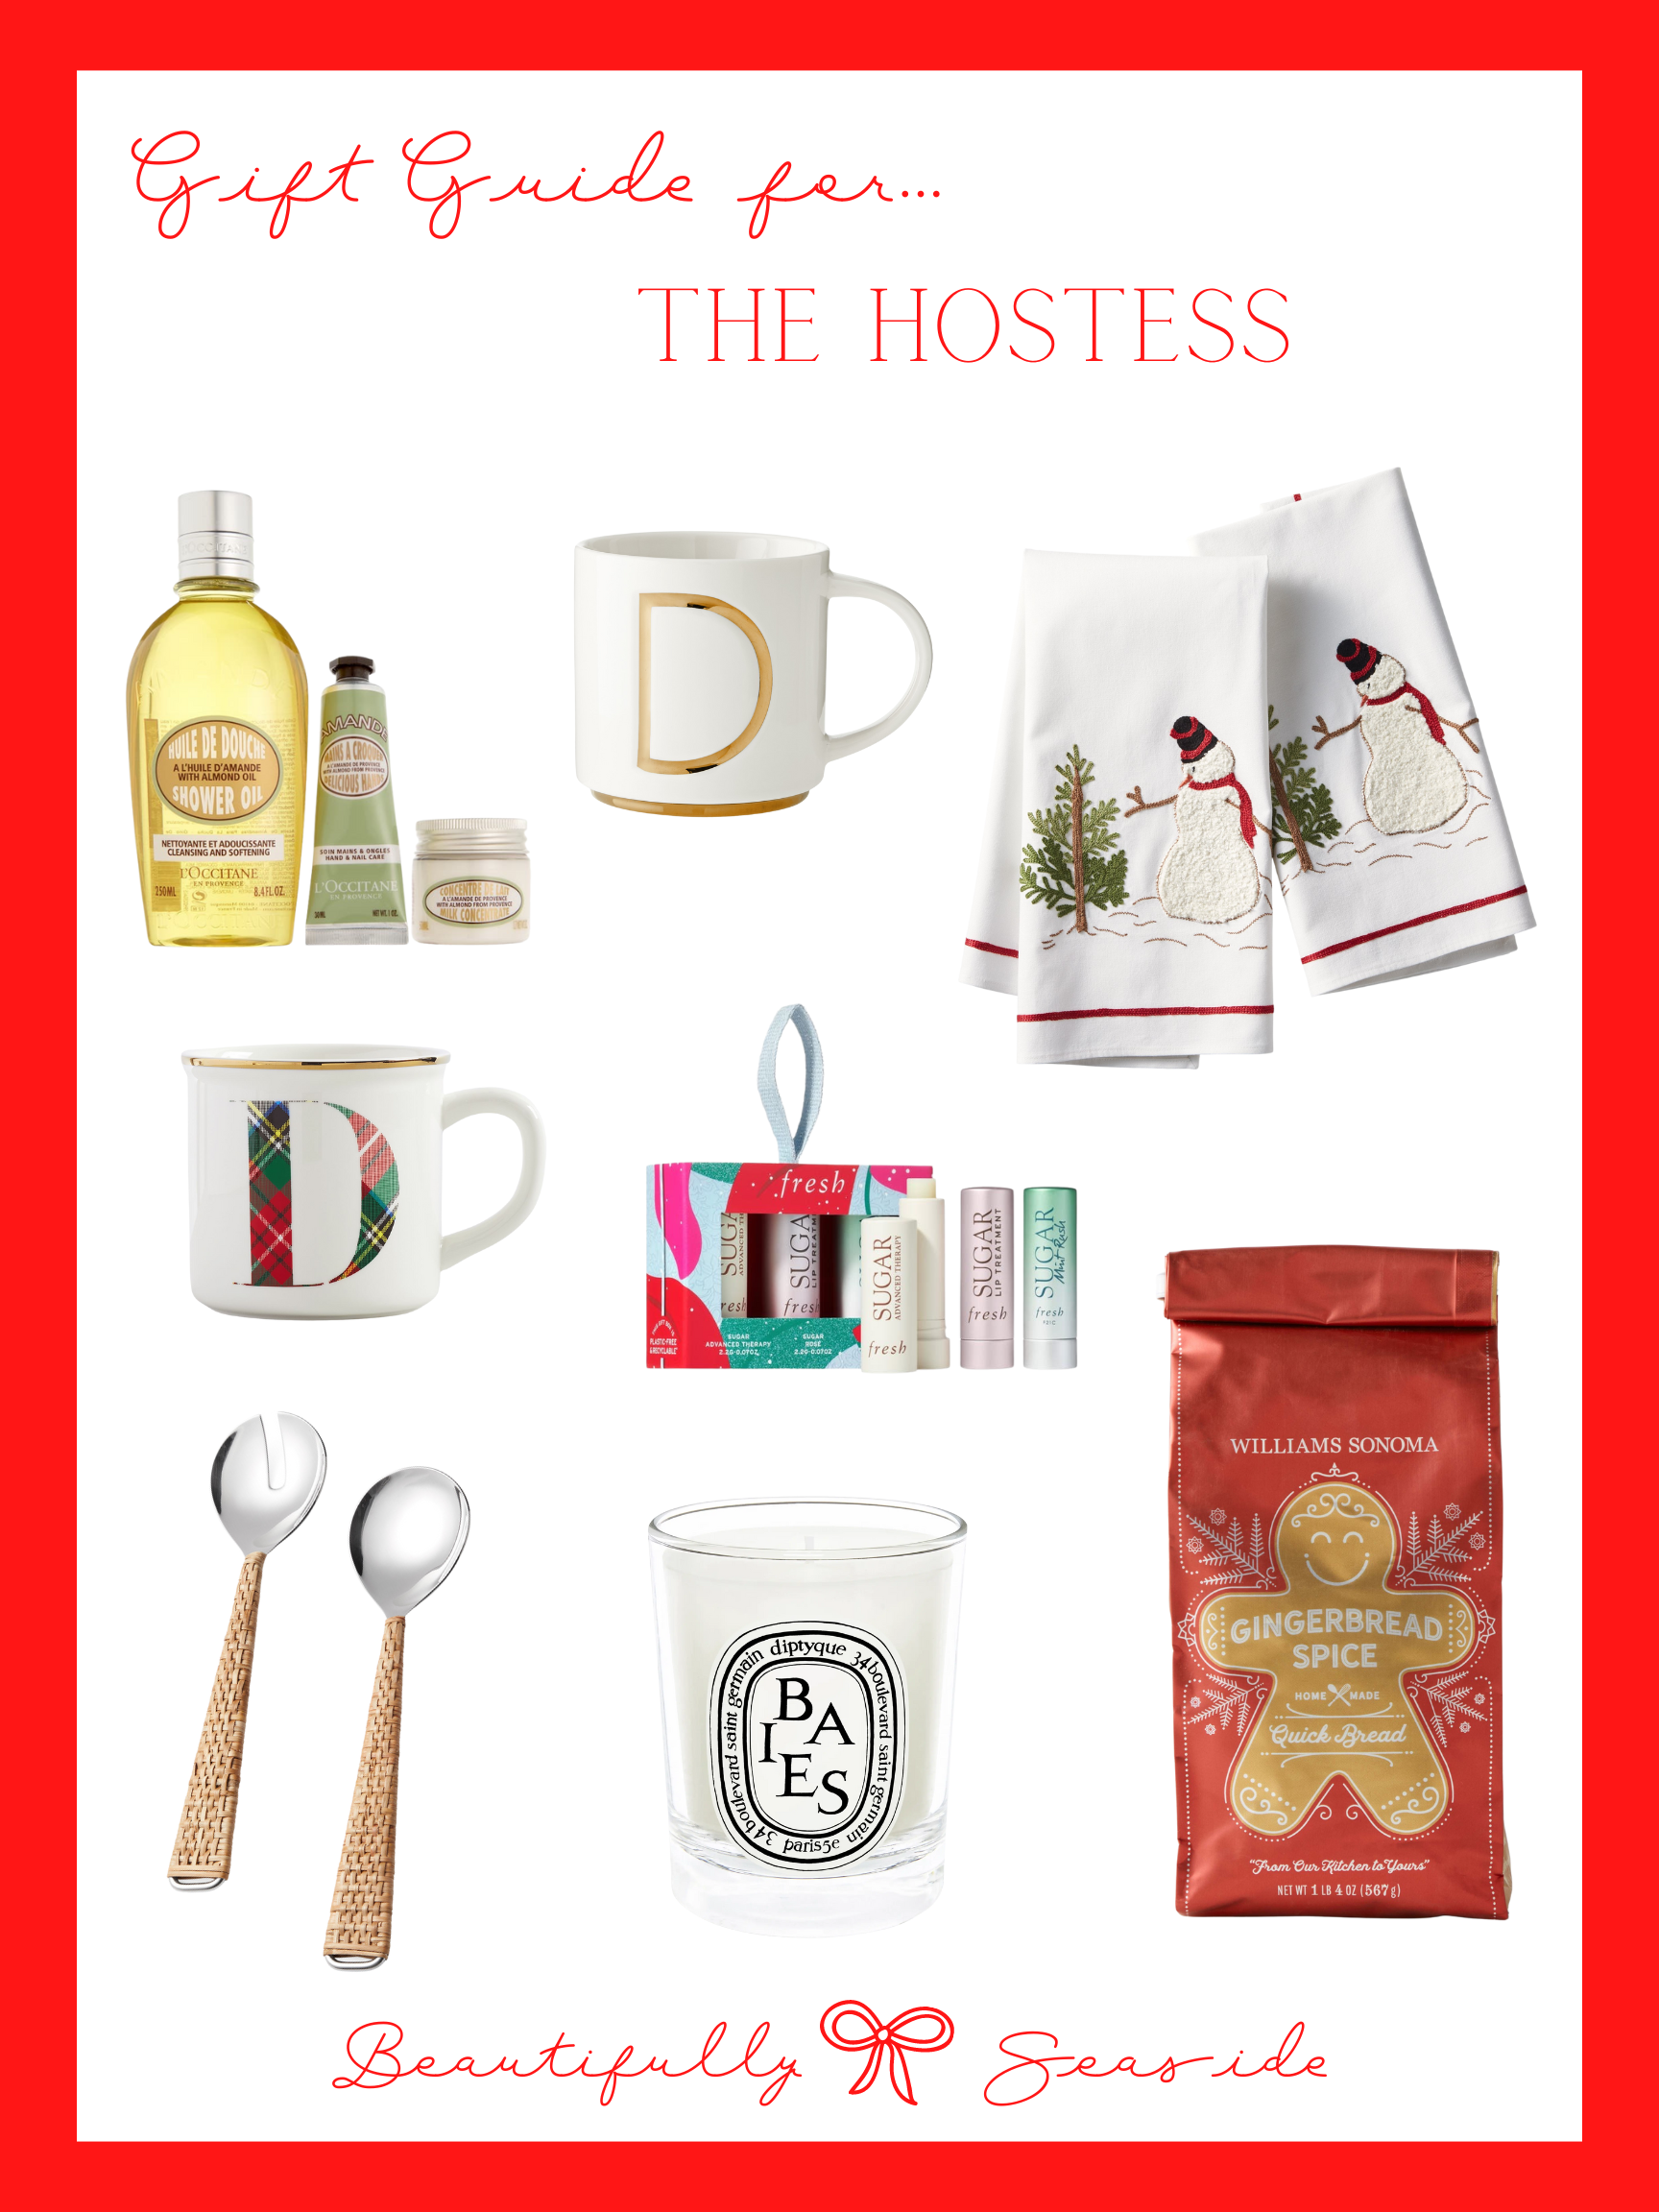 GIFT GUIDE FOR THE HOLIDAY HOSTESS by Desiree Leone of Beautifully Seaside.